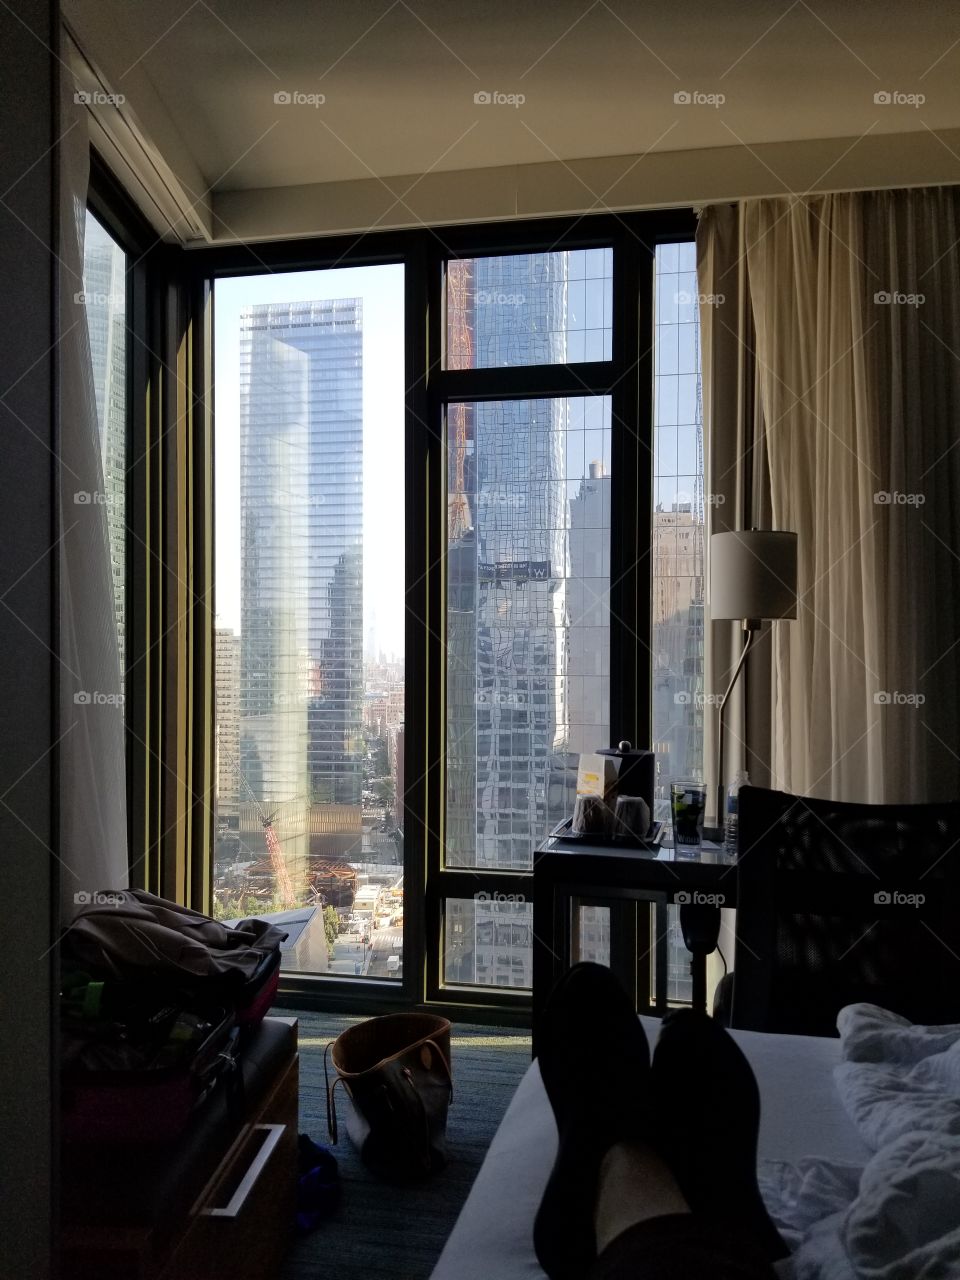 A room with a view in NYC. Looking at World Trade Center